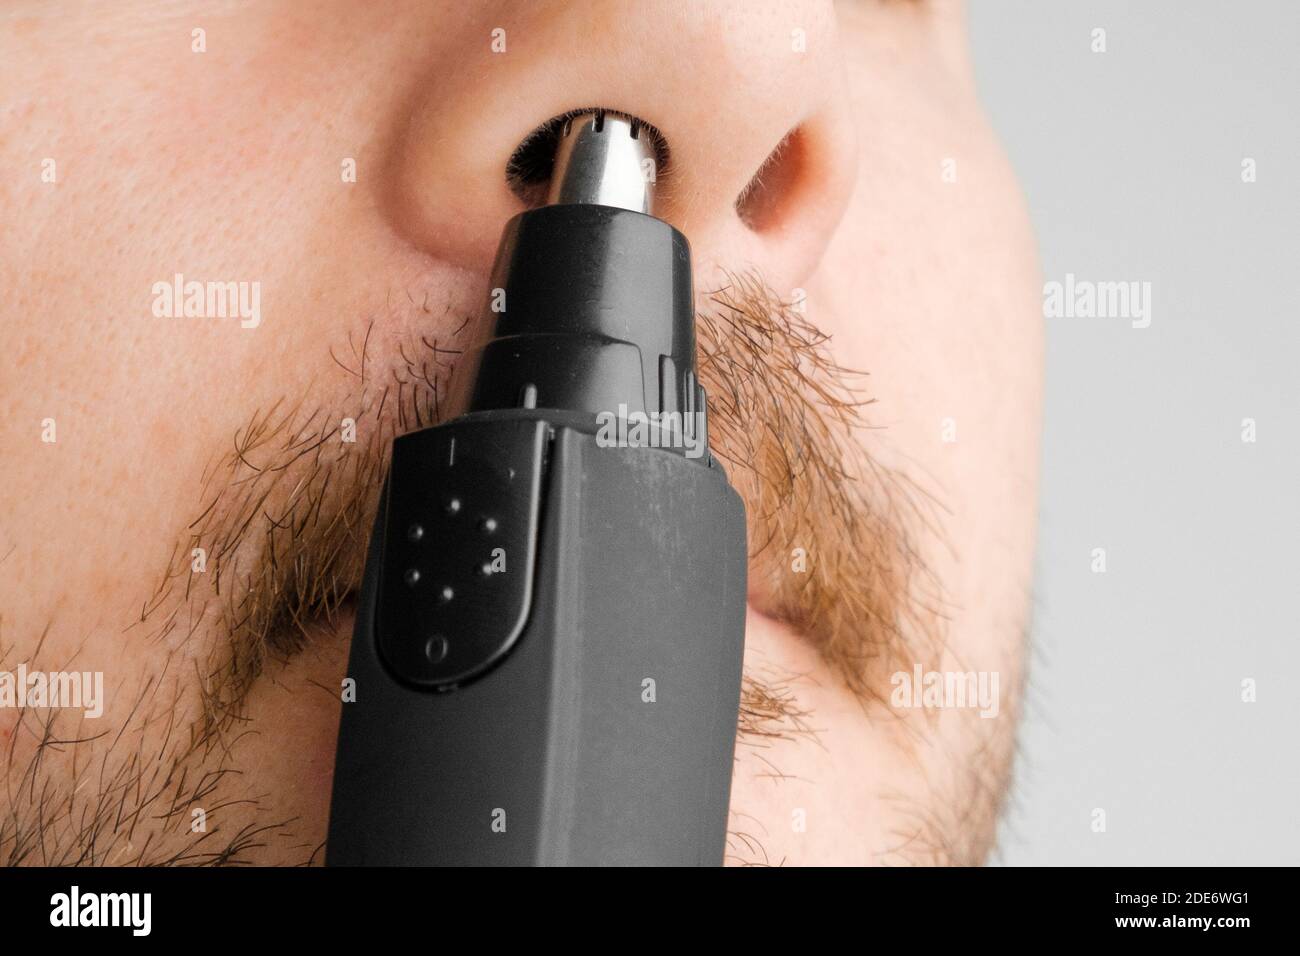 Close up man removing hair from nose using electric trimmer on the grey background. Morning routine. Stock Photo